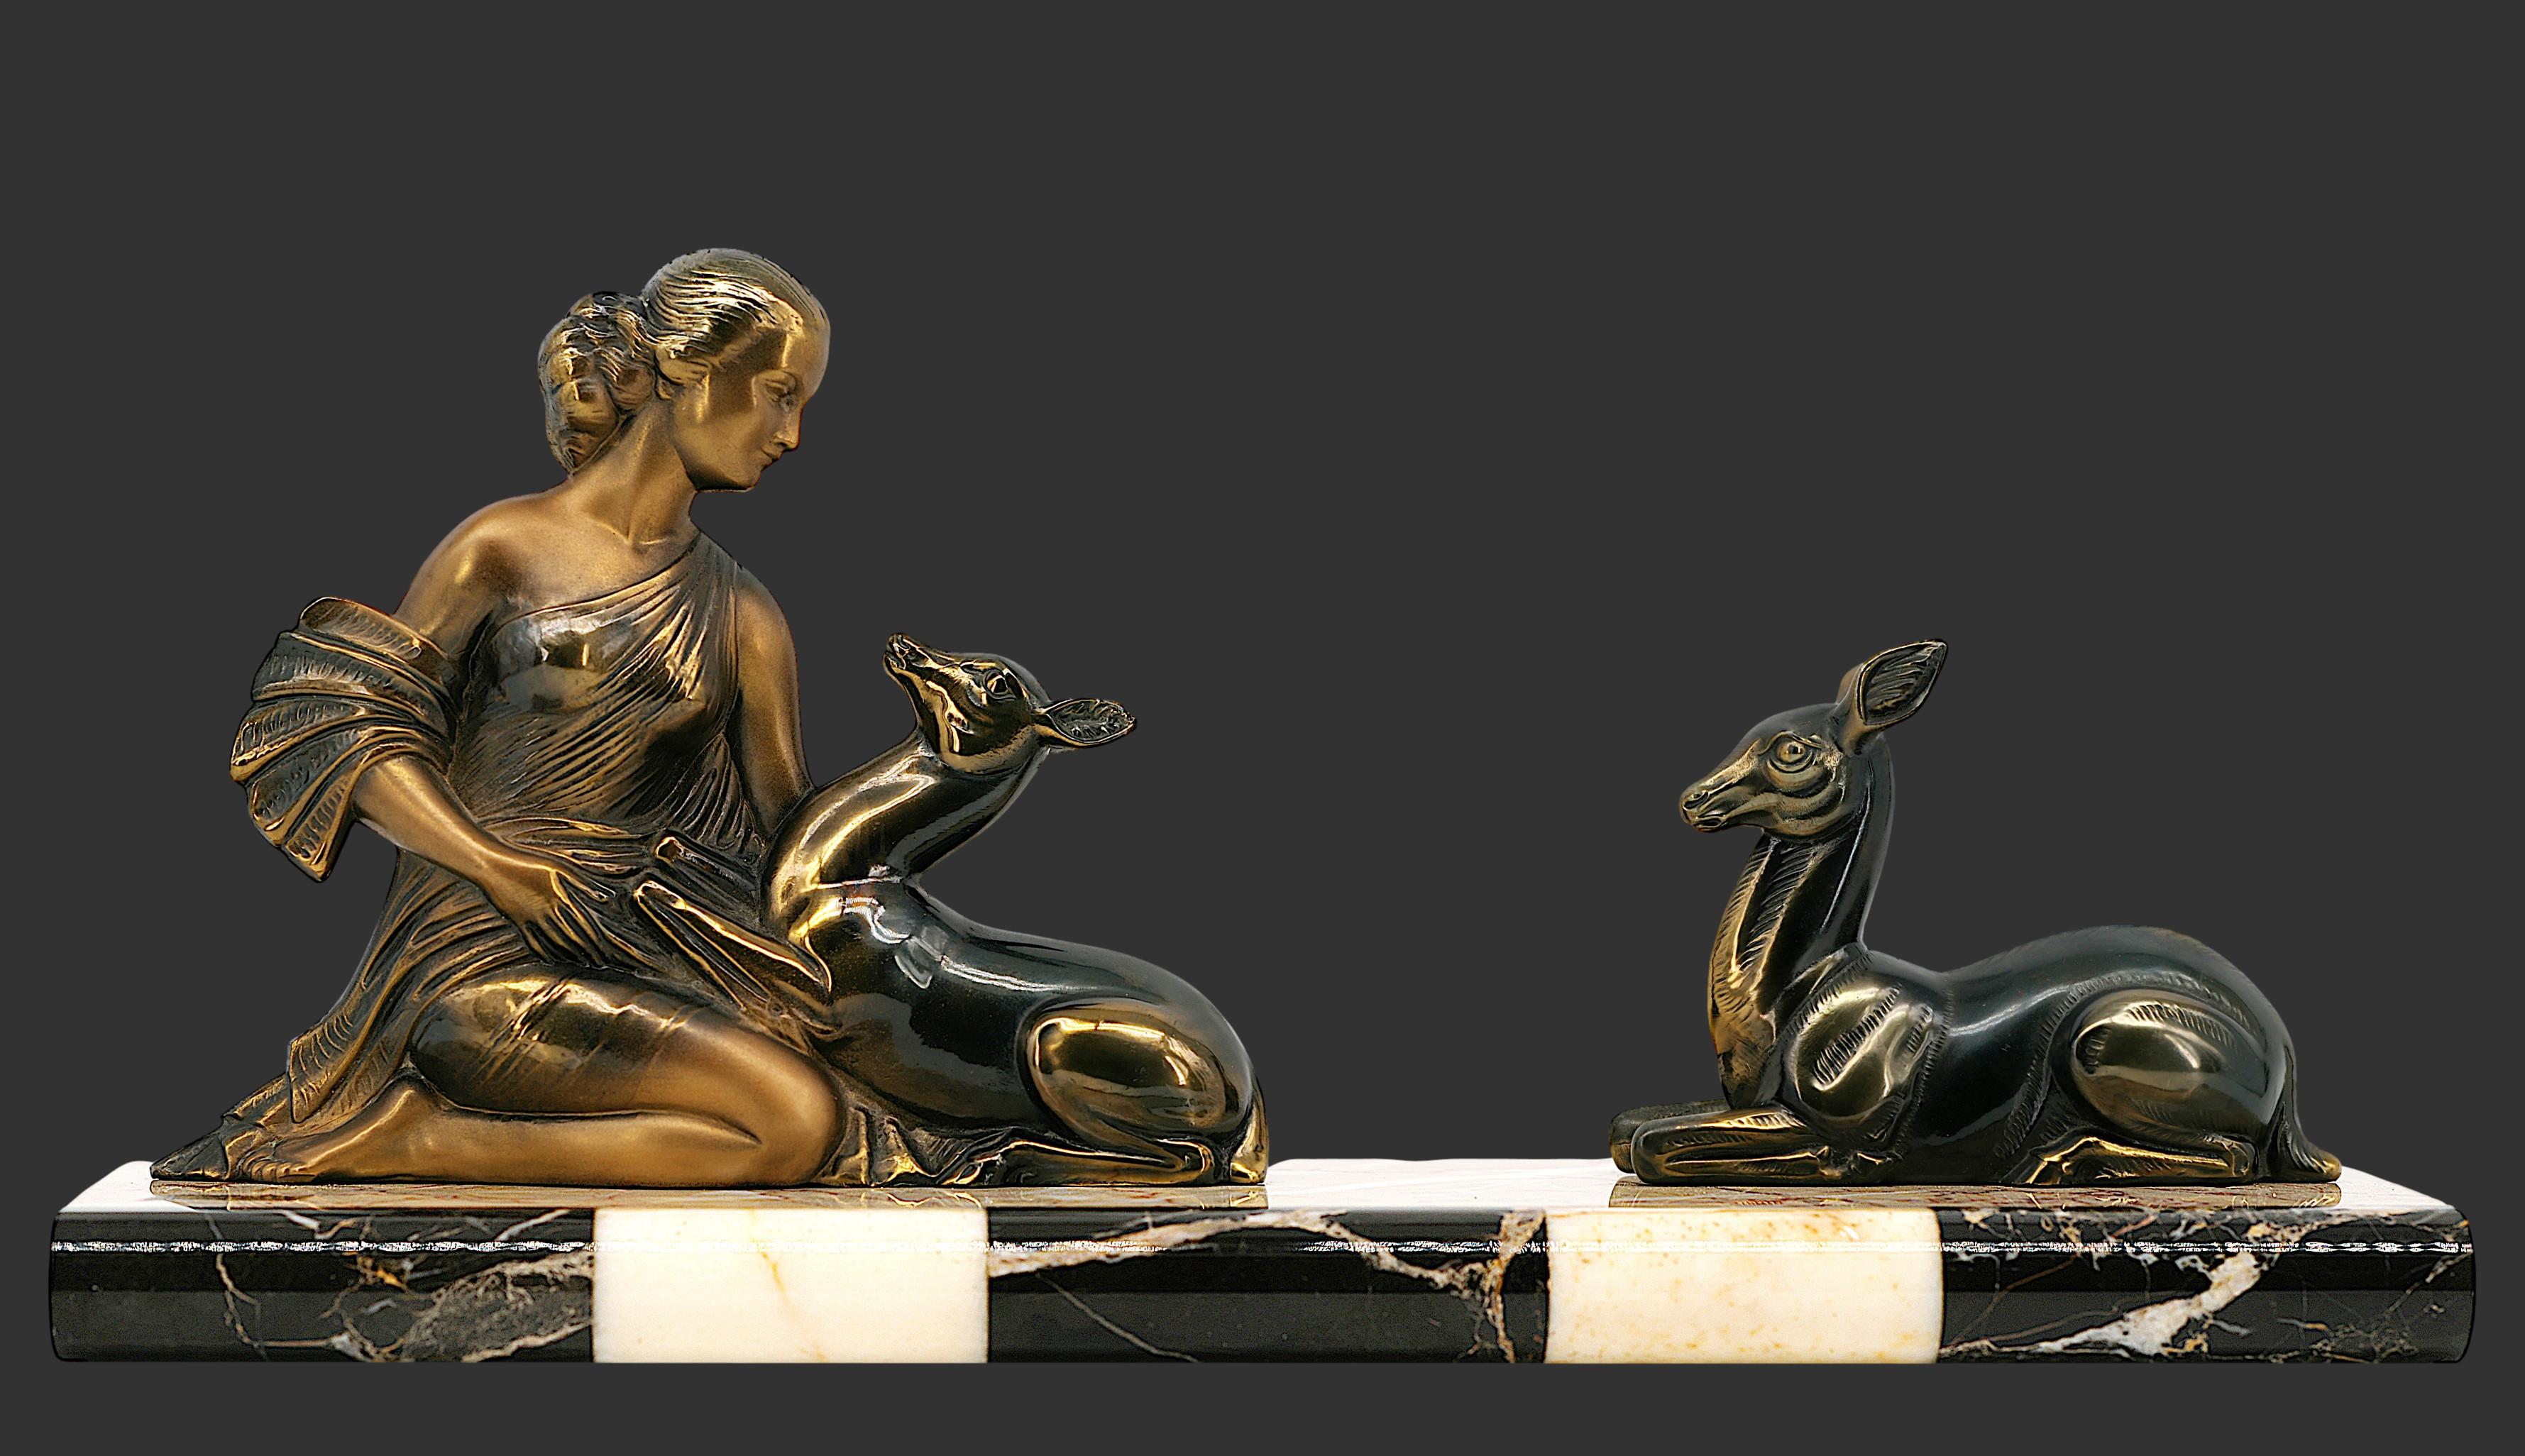 French Art Deco sculpture by Enrique MOLINS-BALLESTE, France, ca.1925. Spelter and marble. Marble base. 